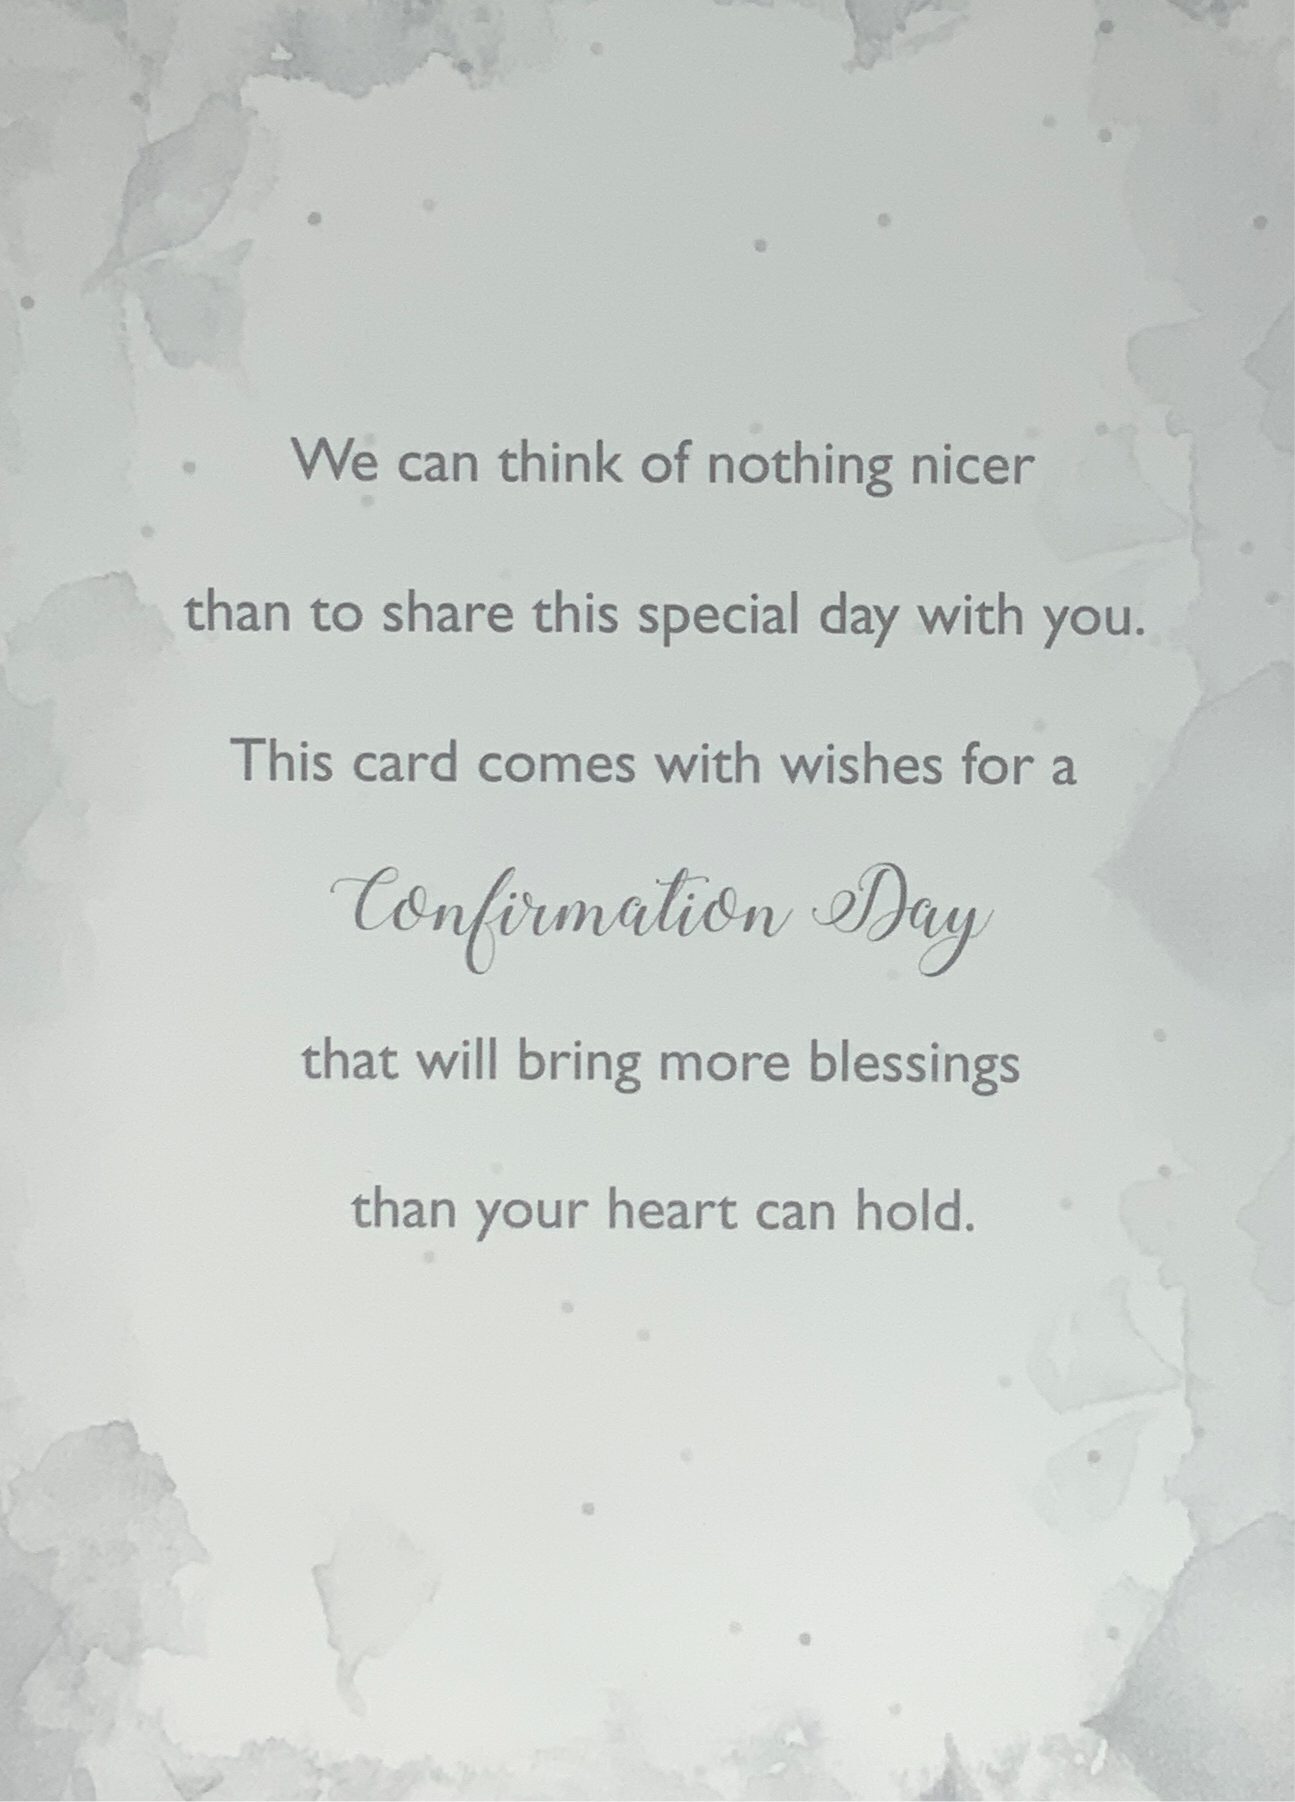 Confirmation Card - Sharing This Special Day With You (Girl)